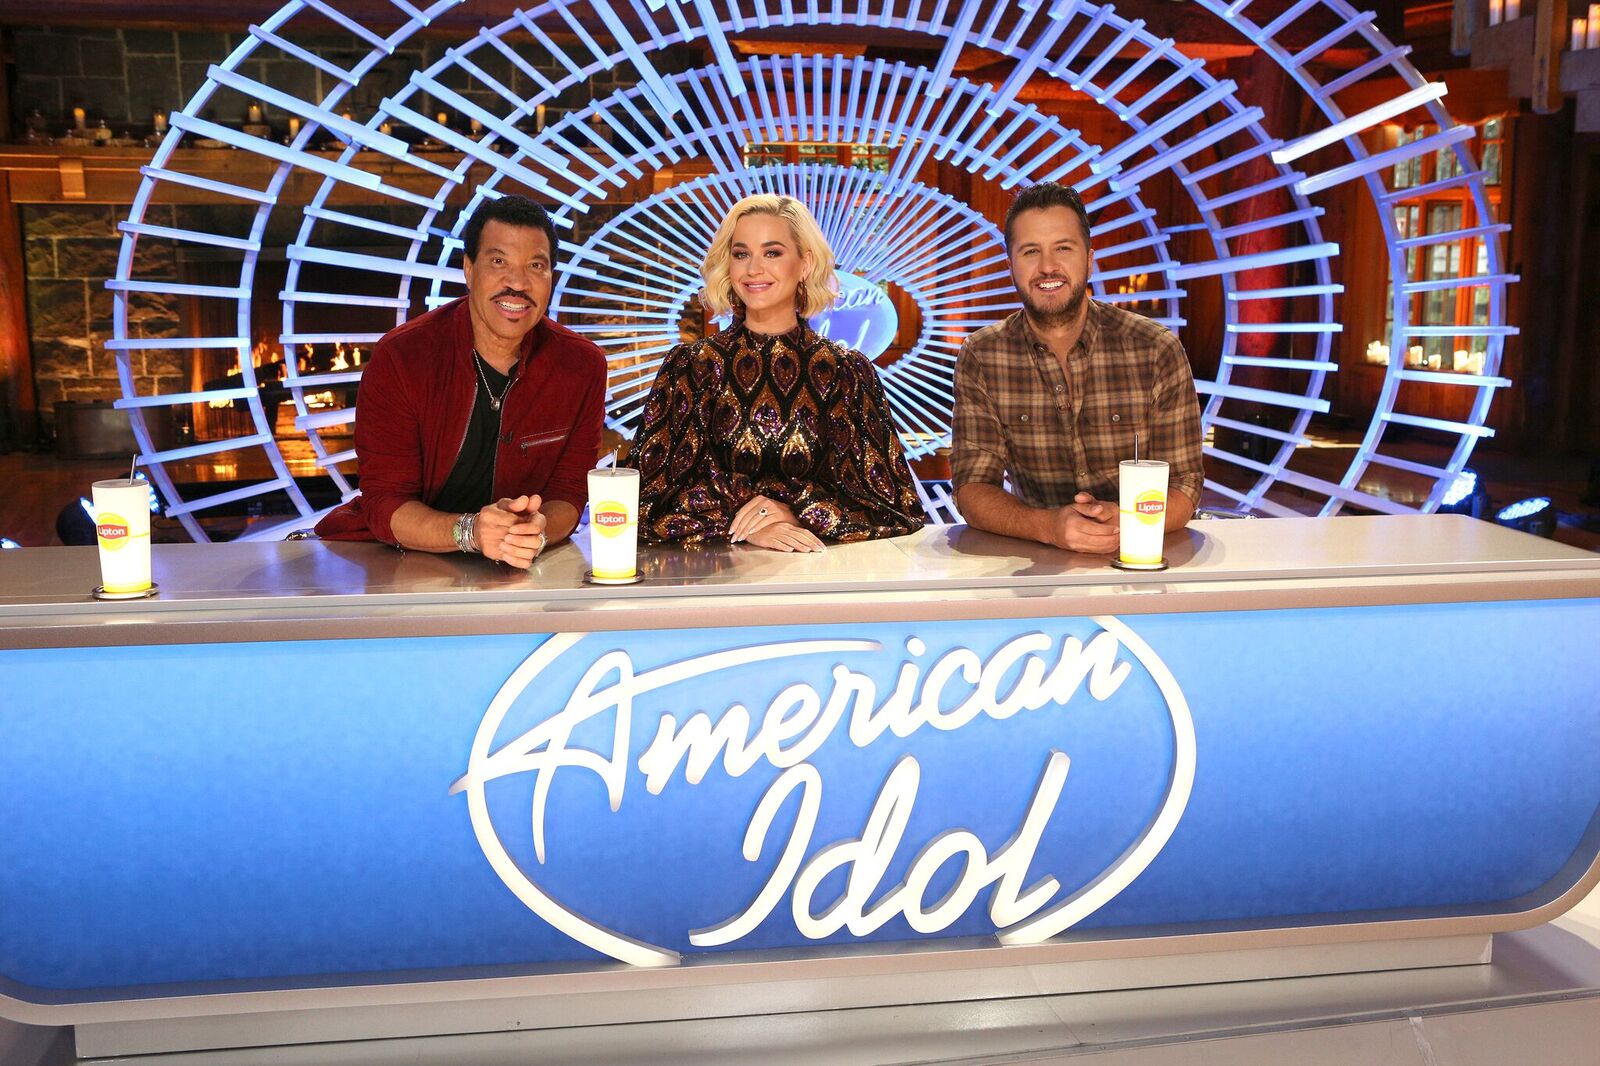 Lionel Richie, Katy Perry, and Luke Bryan on the set of "American Idol" season 3 on November 08, 2019 | Photo: Getty Images